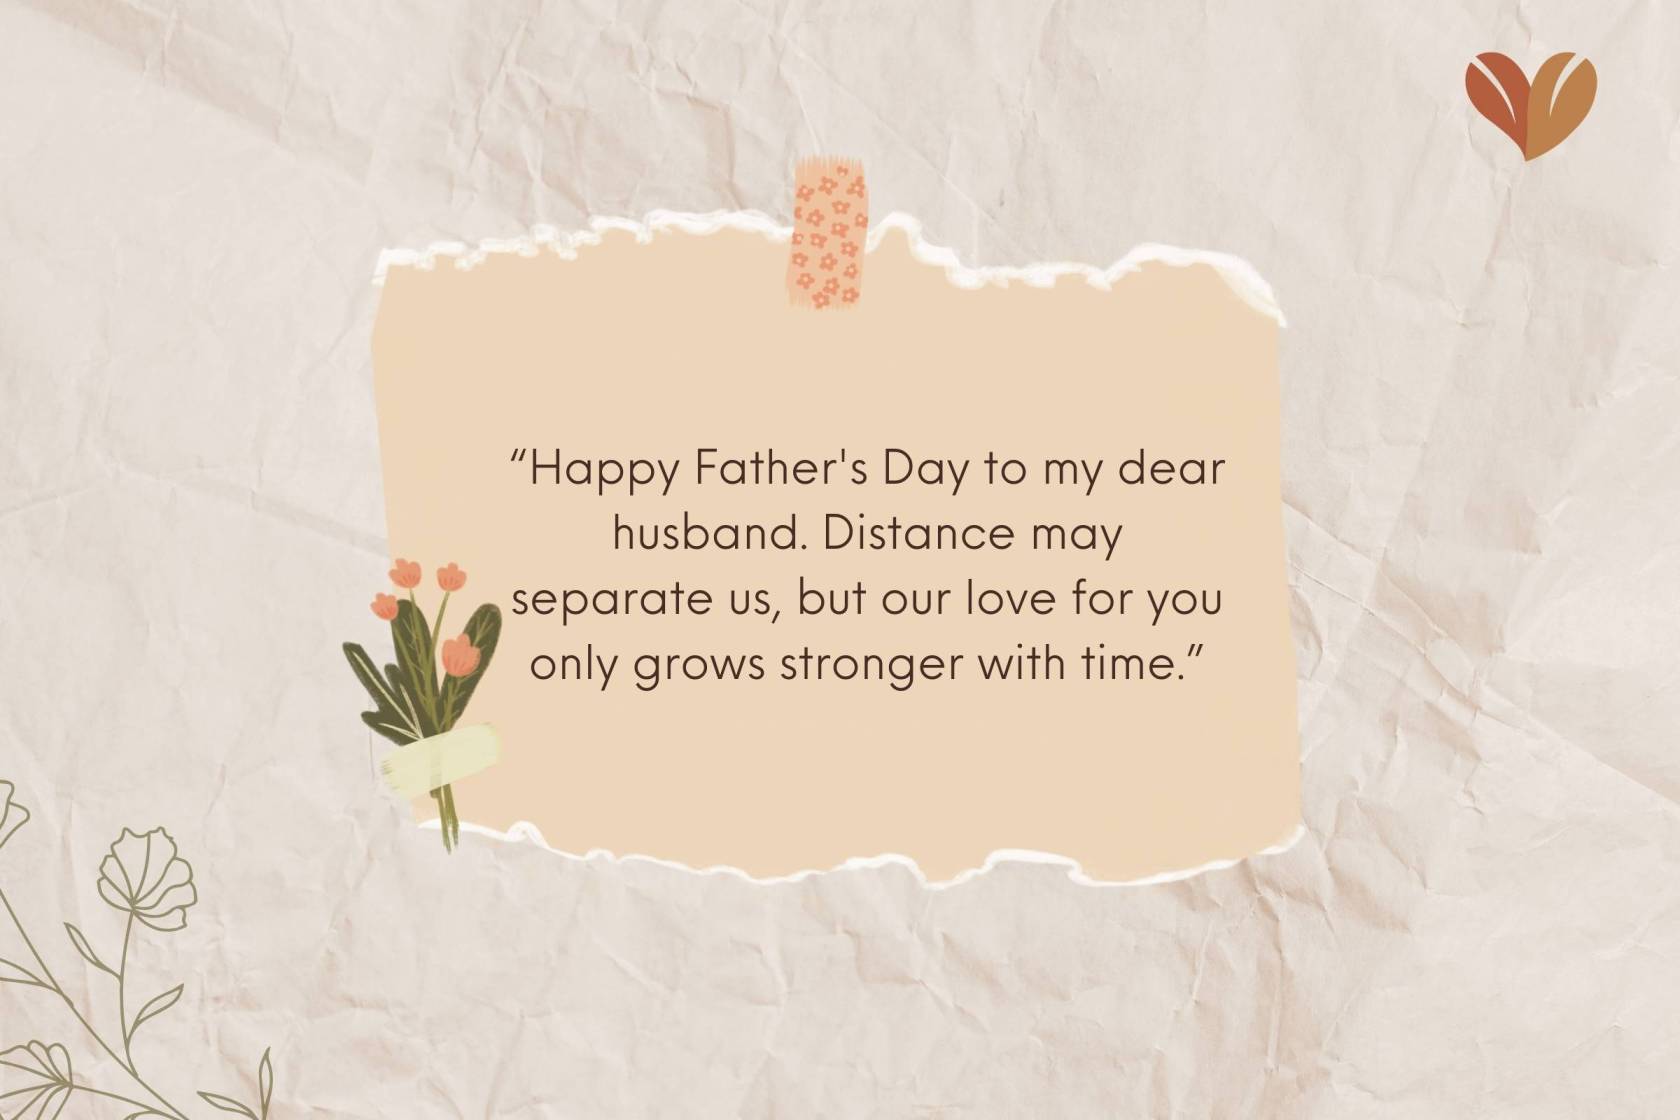 Happy Father's Day Message to a Long Distance Husband